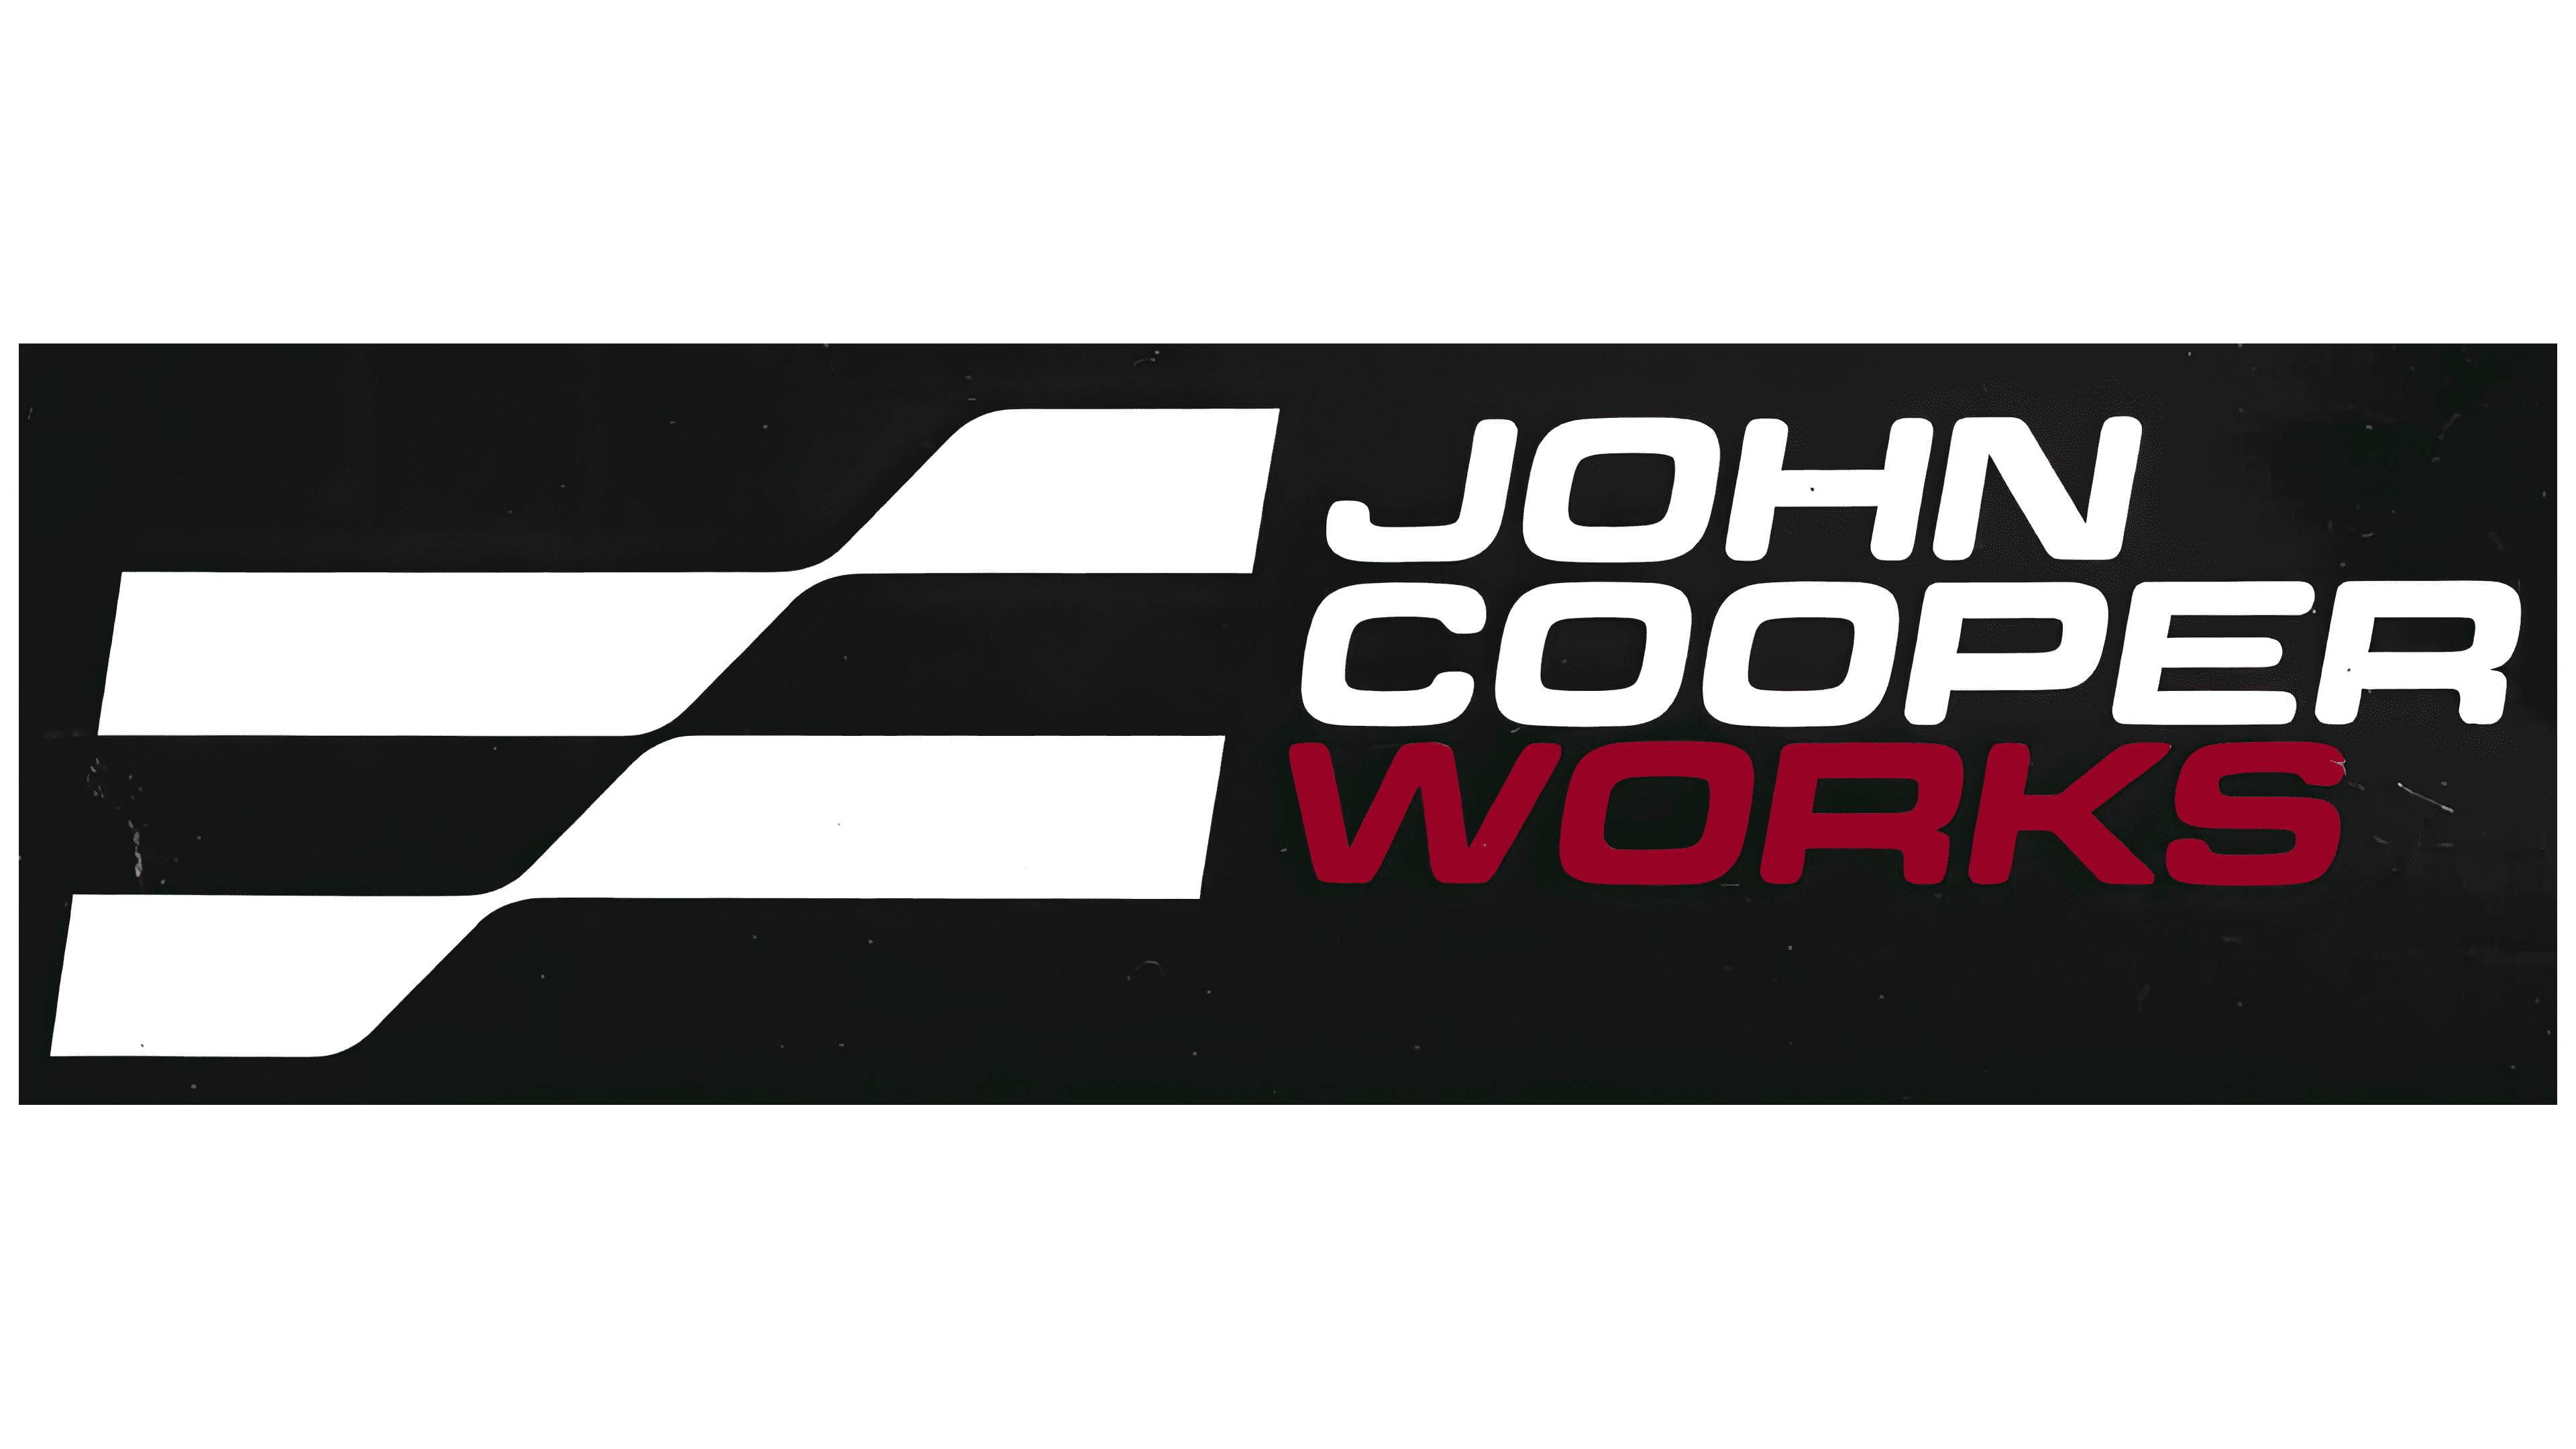 MINI Introduces Revamped John Cooper Works Logo for Upcoming Models